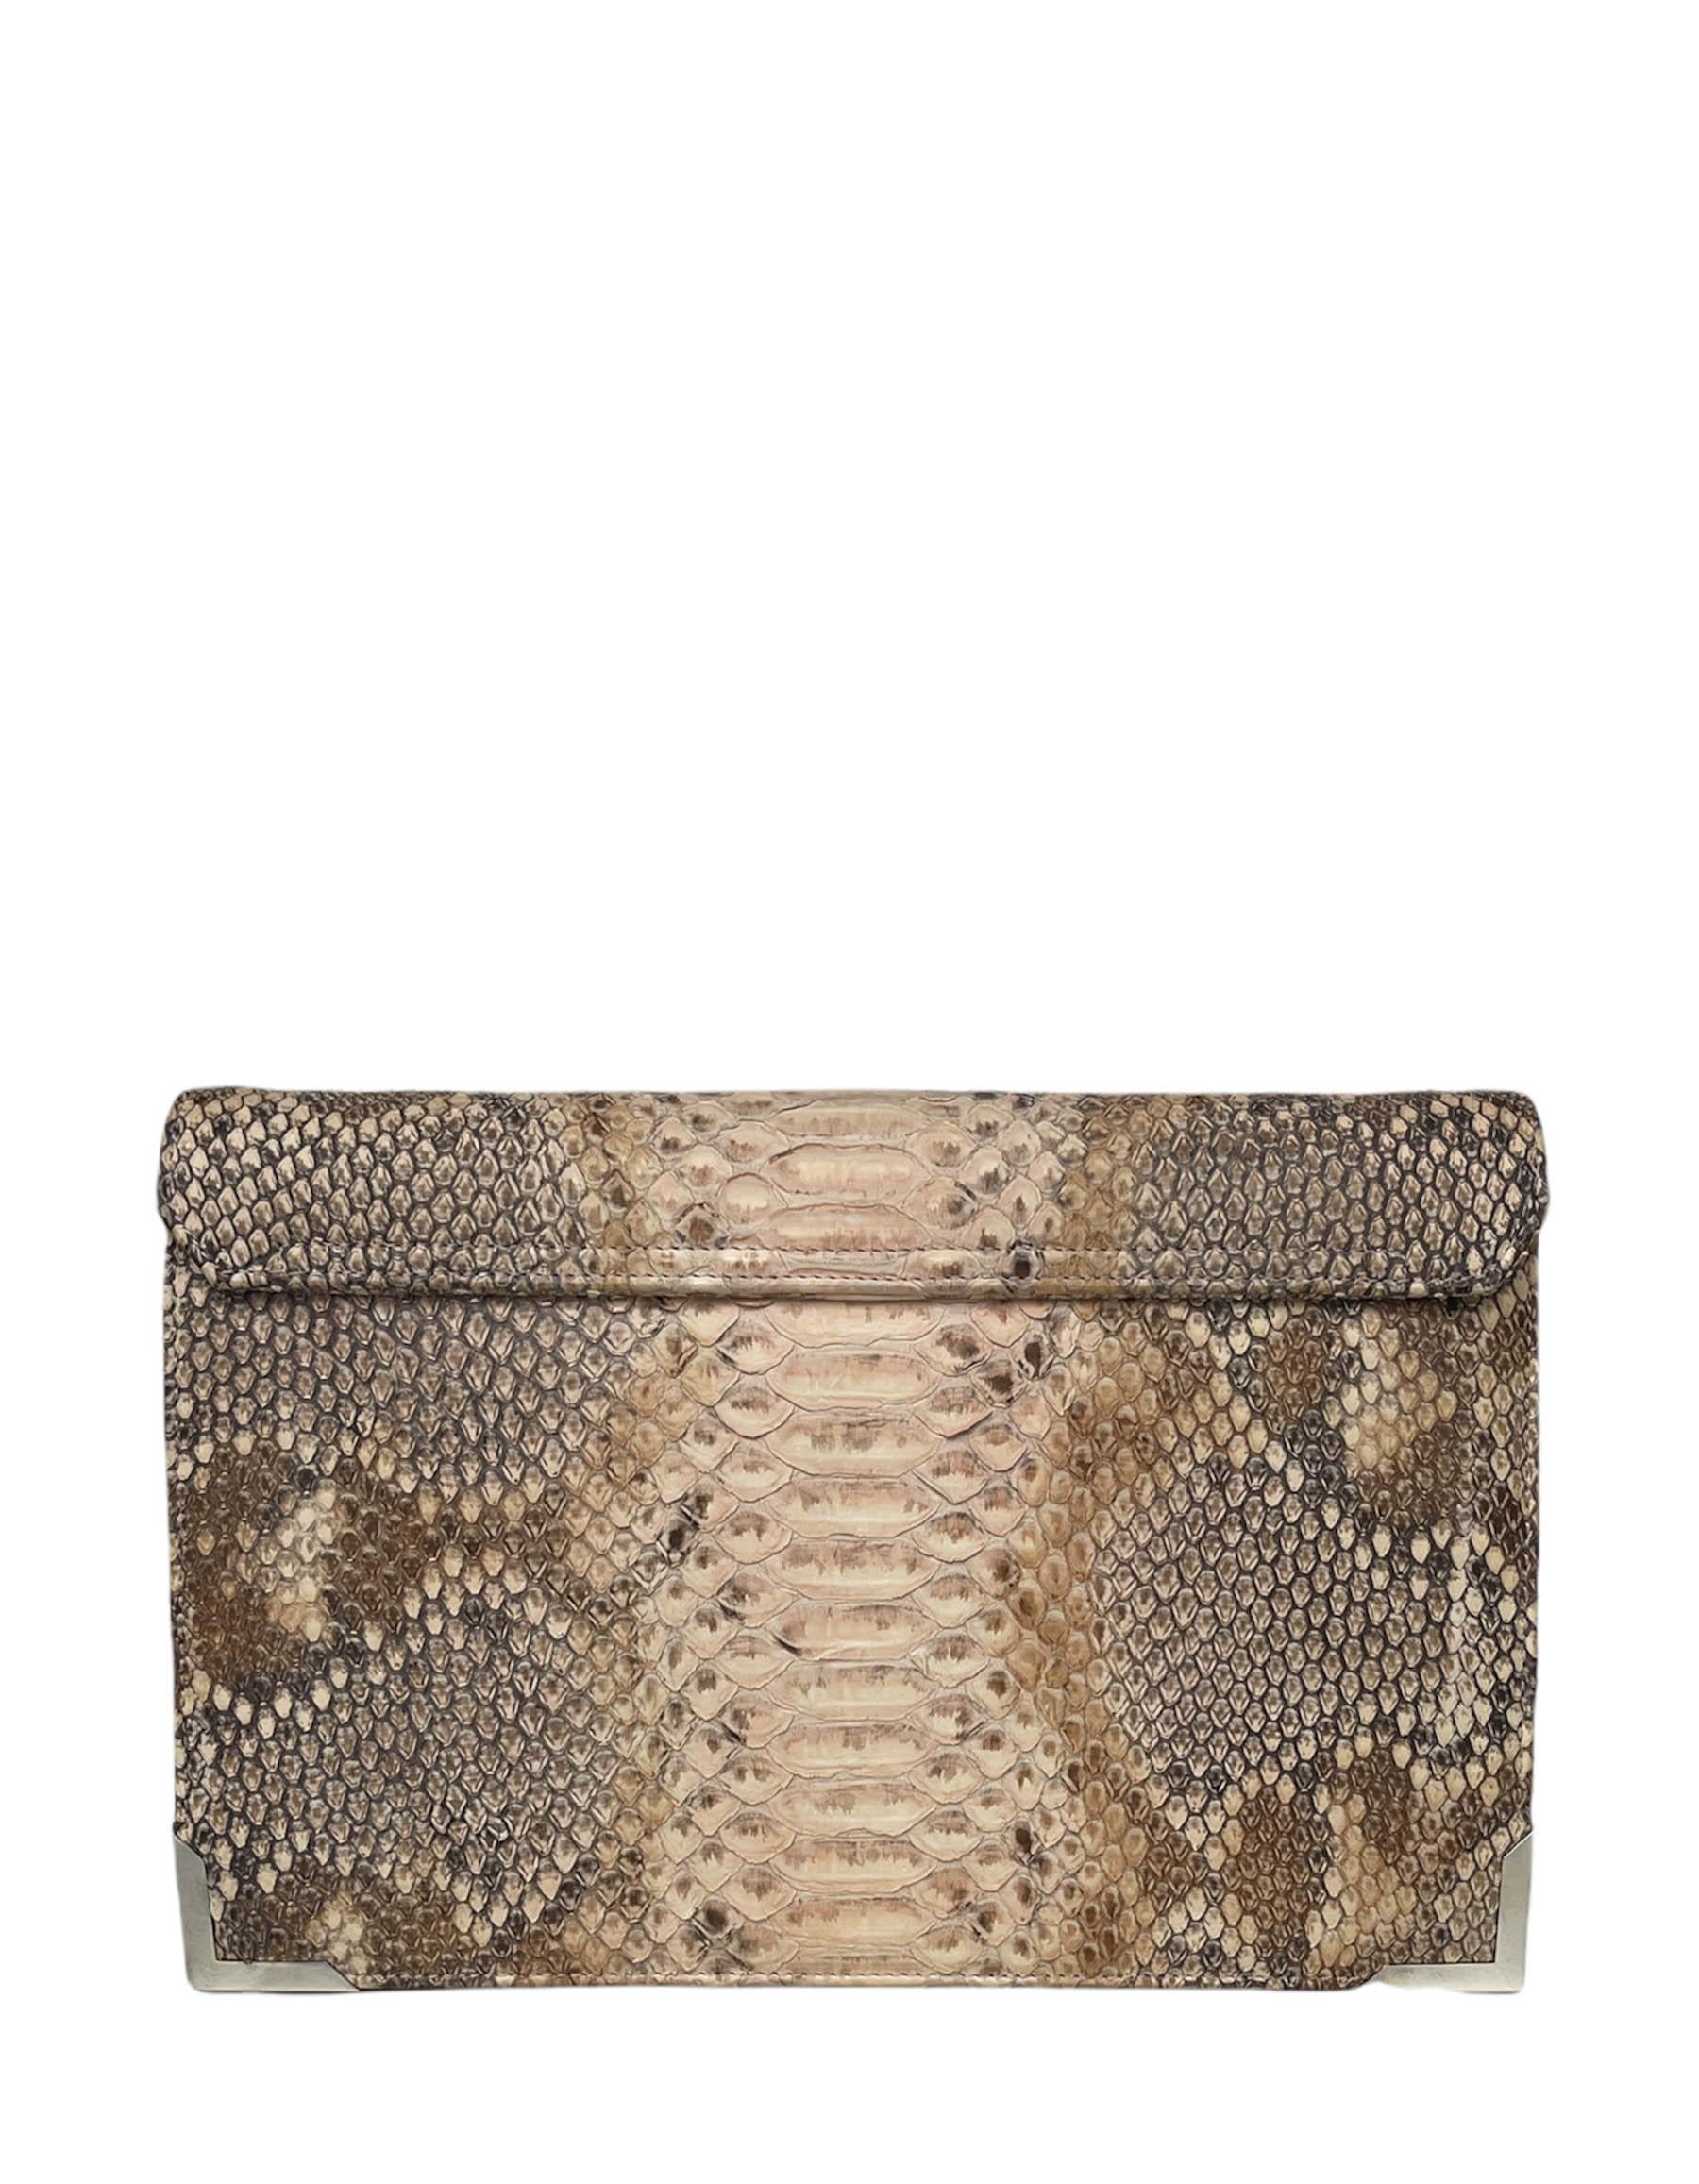 Marchesa Valentina Large Python Envelope Clutch Bag w/ Crystals

Color: Beige
Hardware: Silvertone
Materials: Python, metal, crystals
Lining: Grey textile
Closure/Opening: Flap top with magnet
Exterior Pockets: None
Interior Pockets: One slit